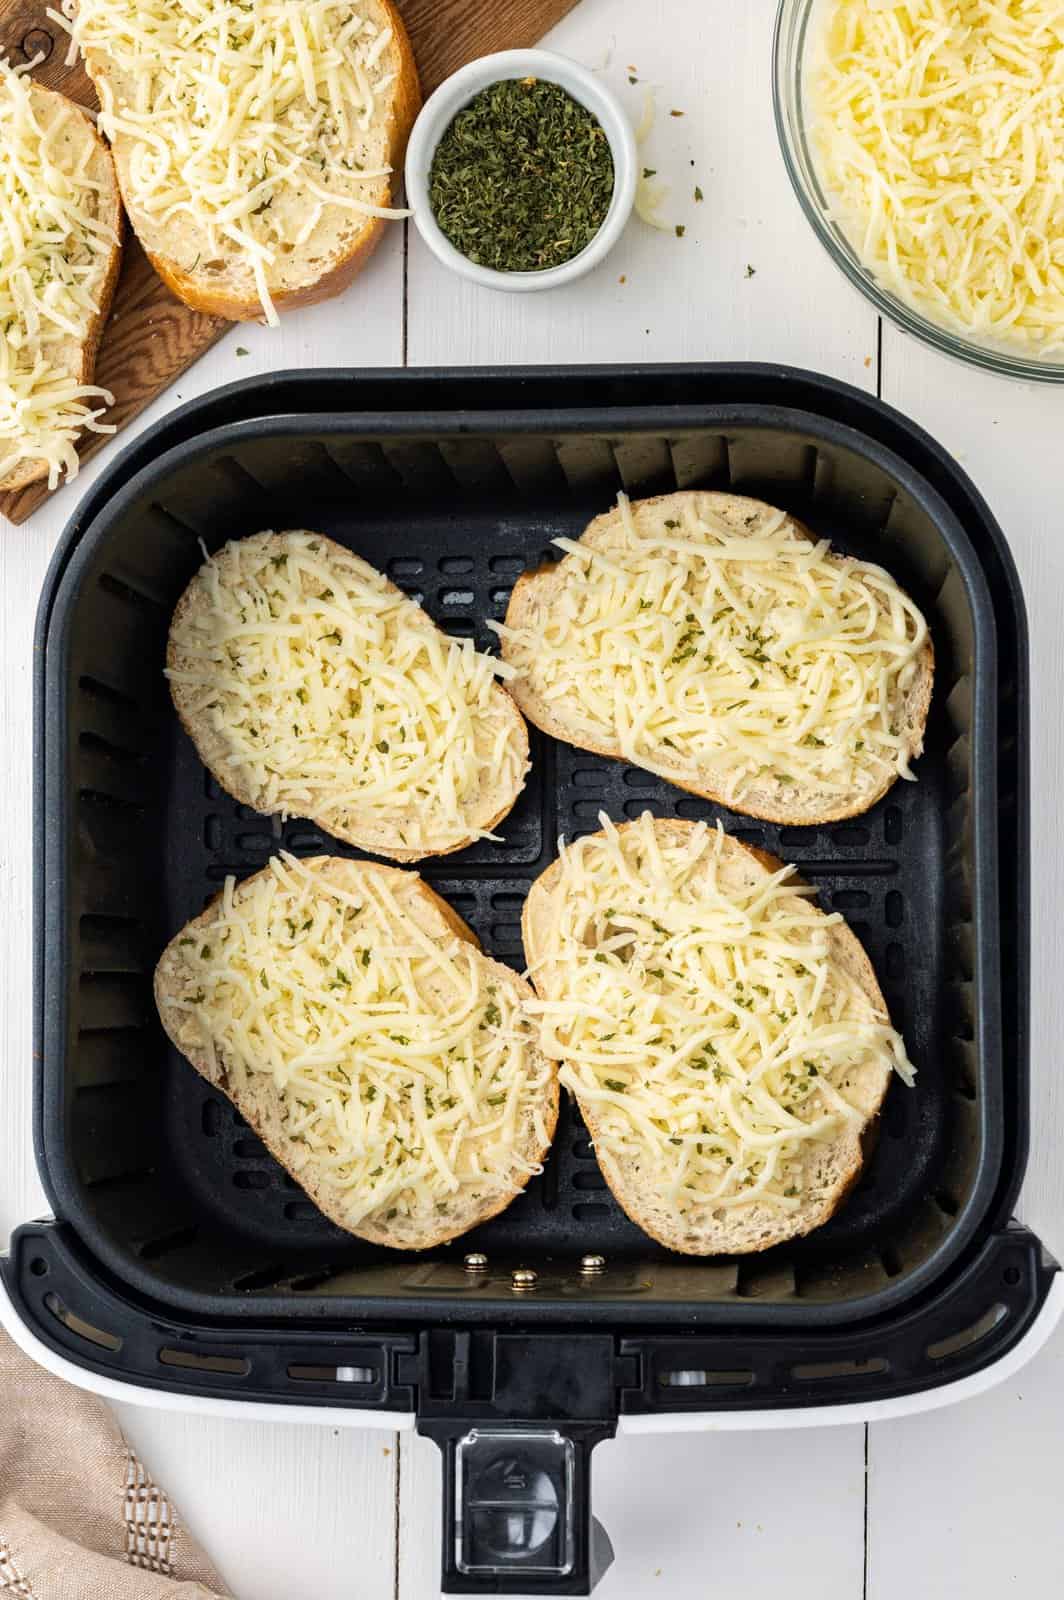 An Air Fryer basket with 4 pieces of garlic bread topped with cheese.